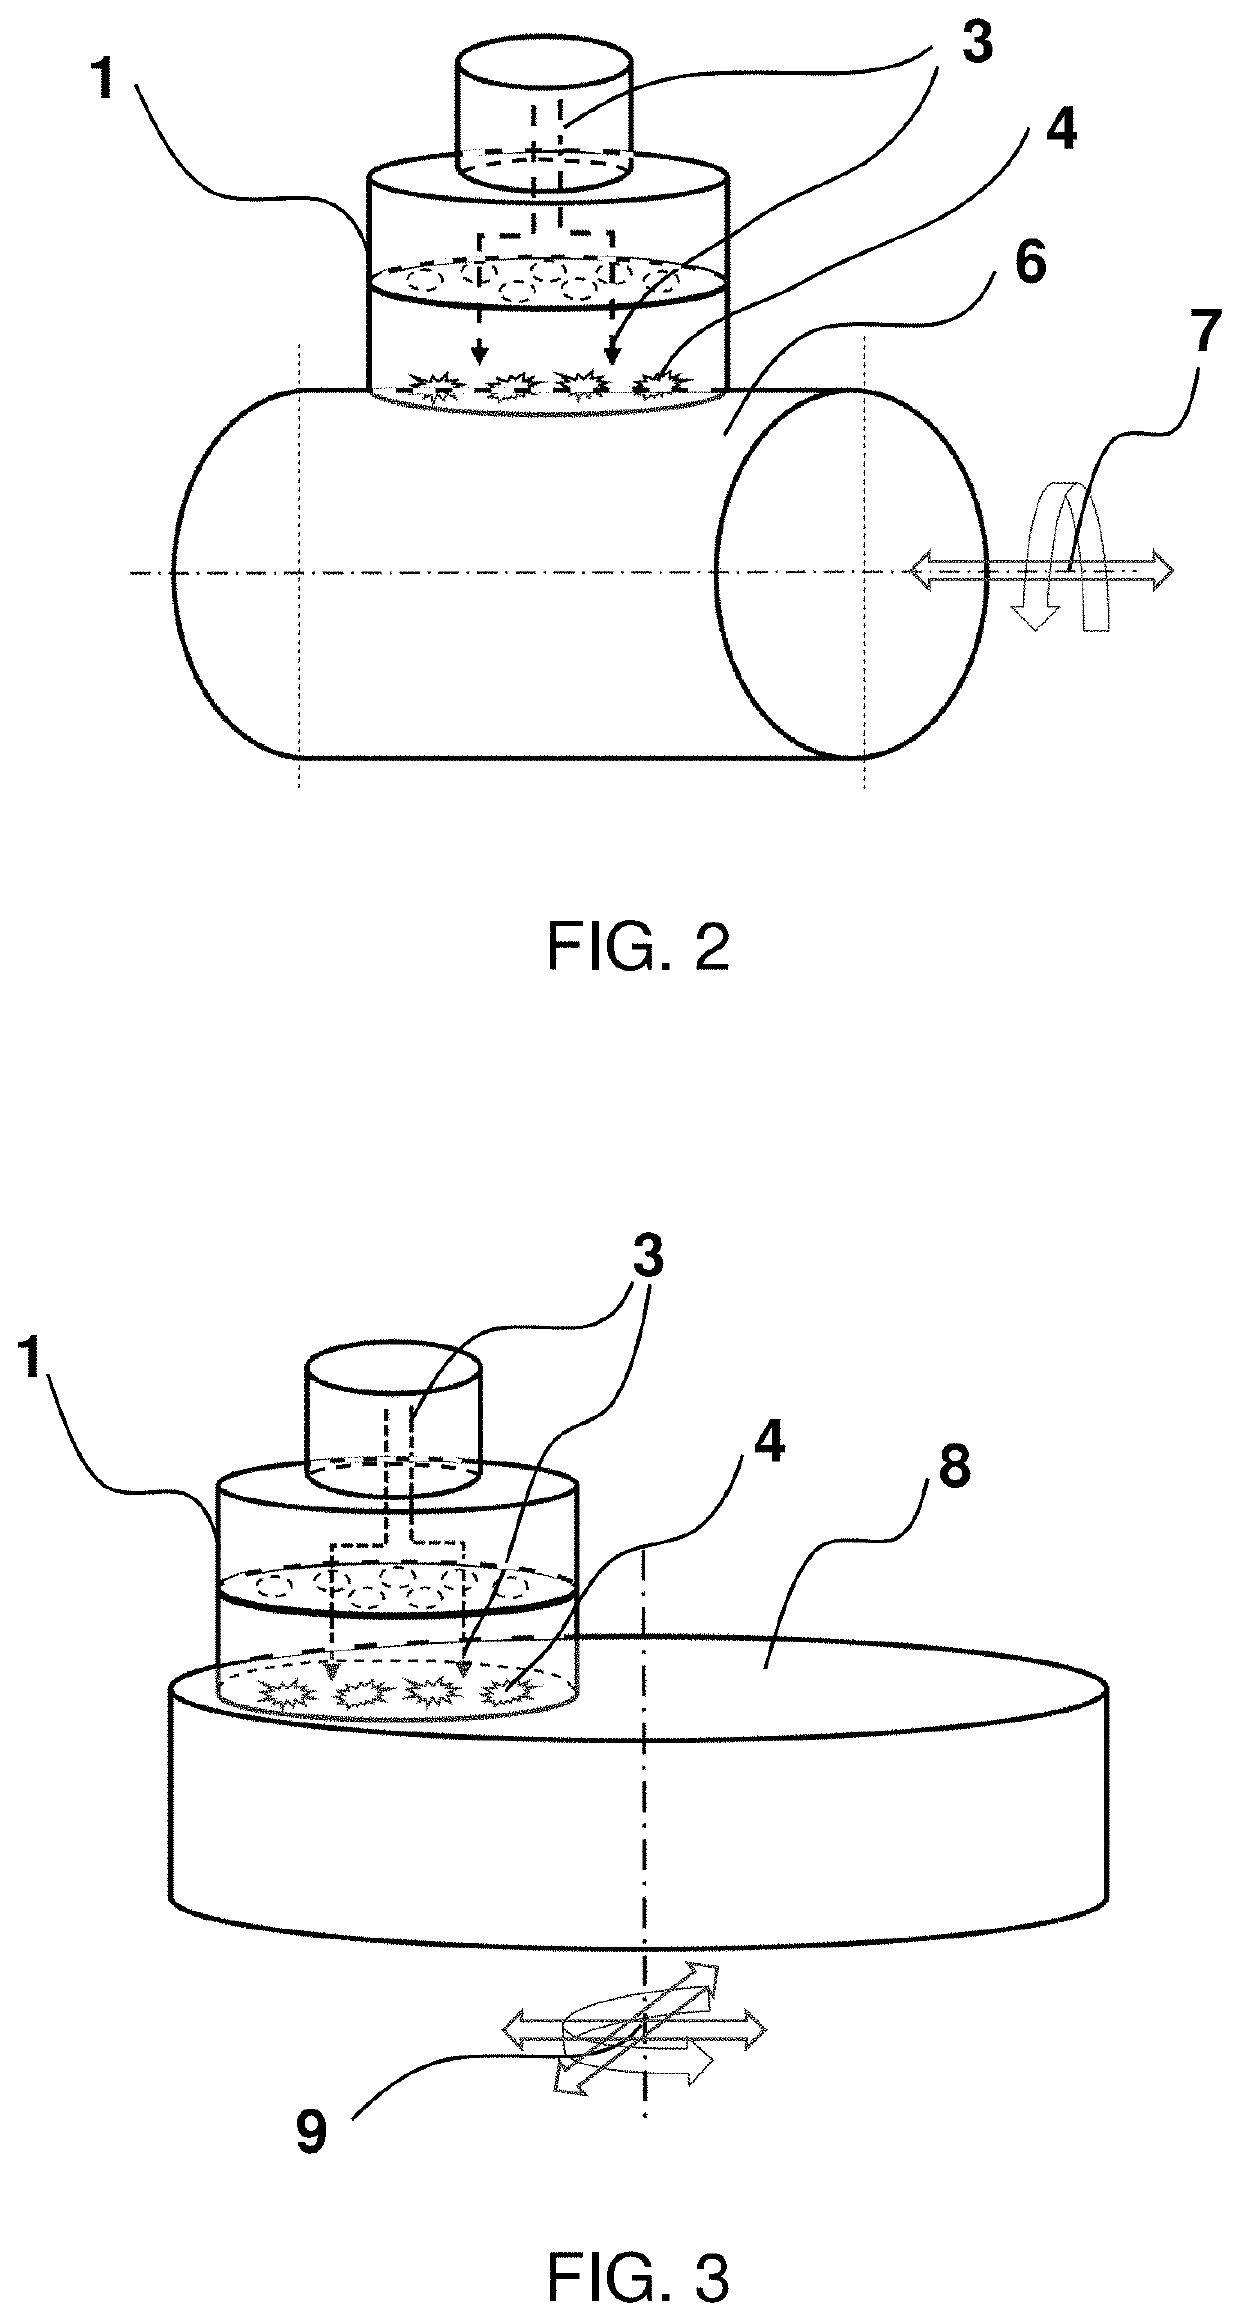 Plasma texturing and coating method for frictional and thermal management